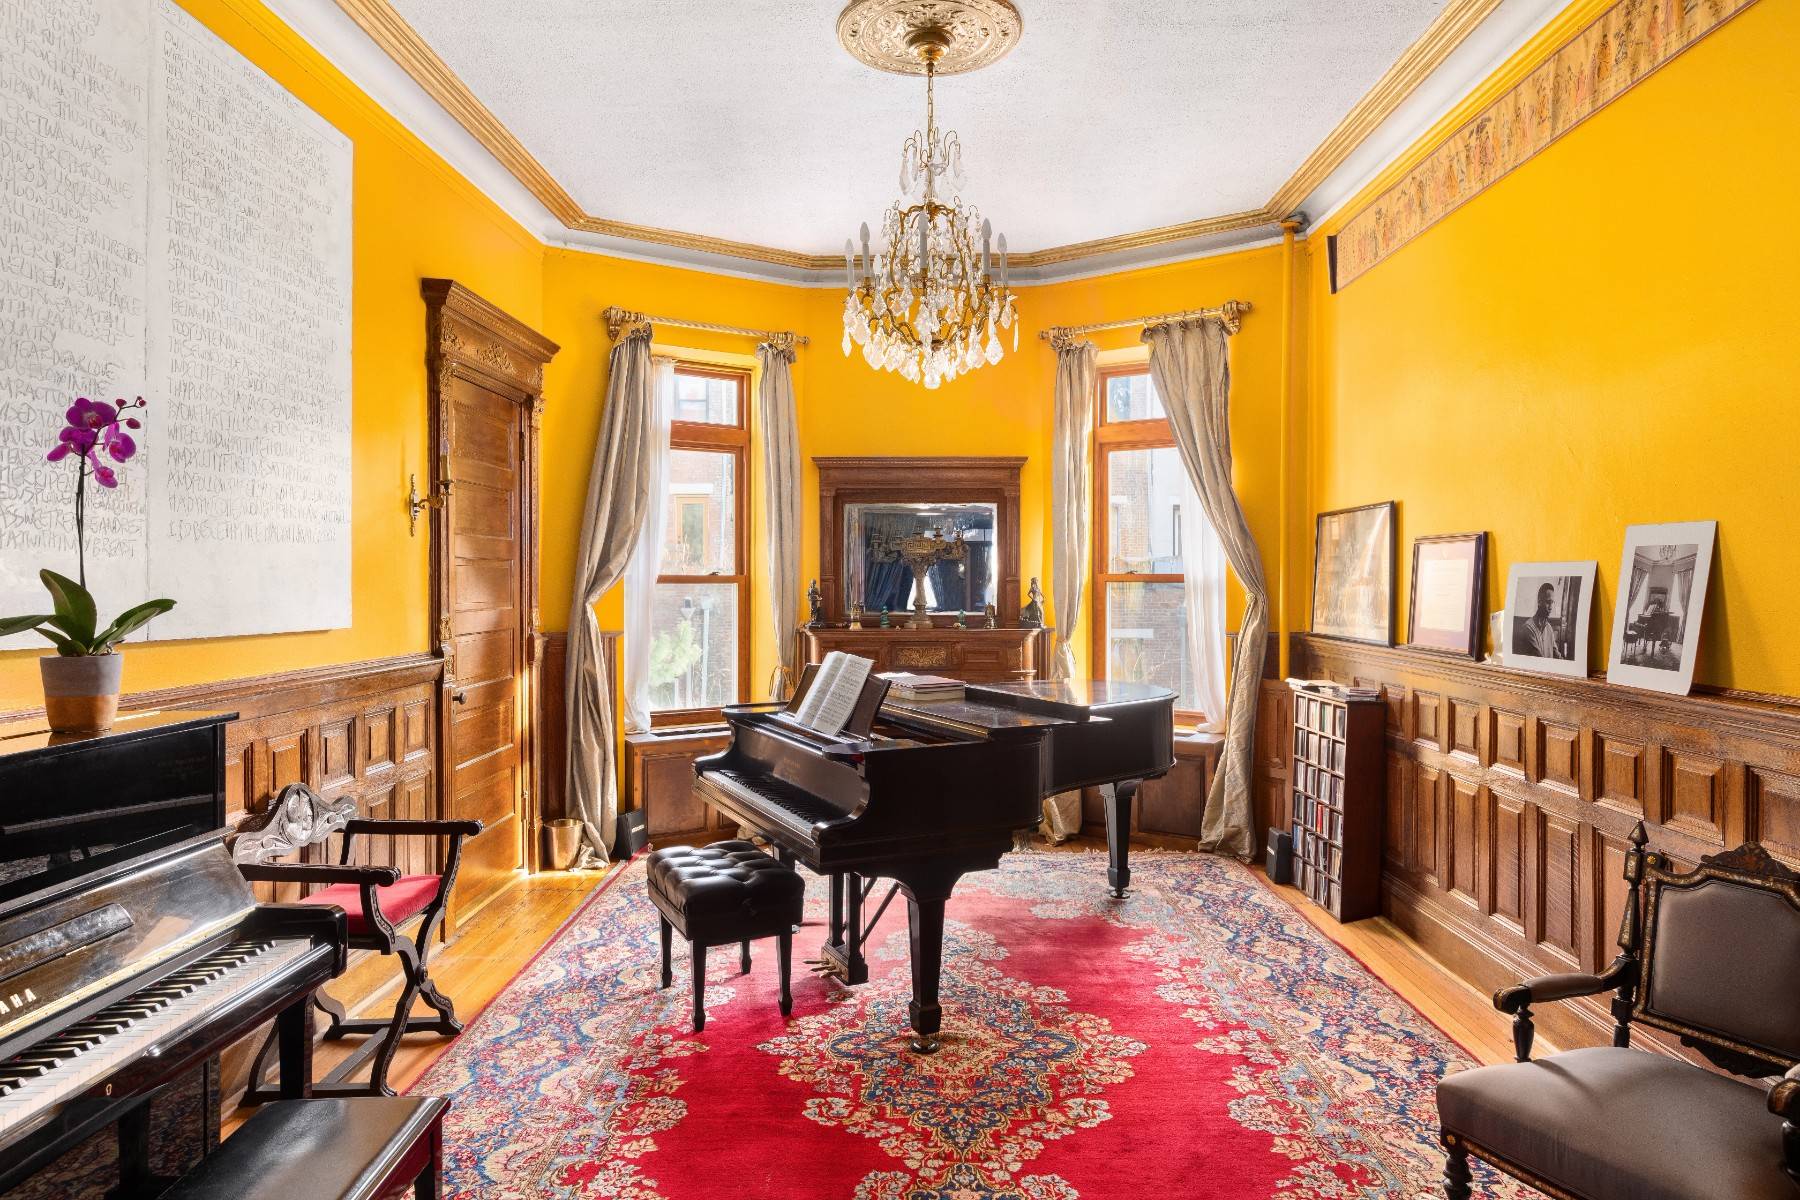 This charming five story brownstone situated in Hamilton Heights, designed by architect Adolph Hoak in 1890, is truly a one of a kind single family home.